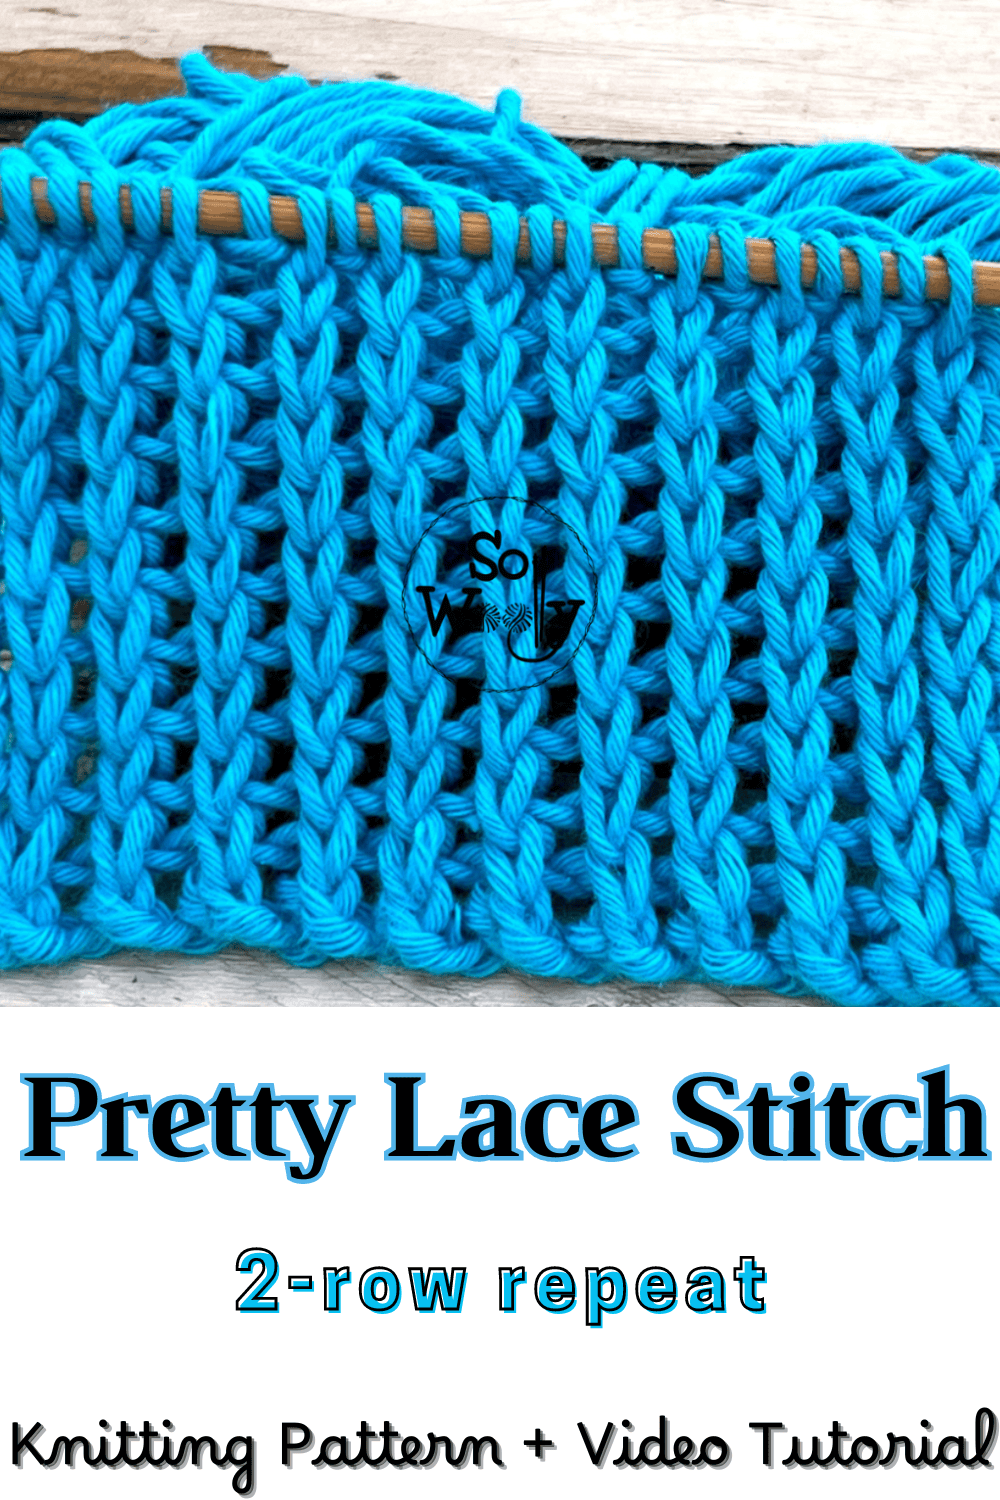 How to Knit a Pretty Lace Stitch Pattern (Ideal for Beginners). So Woolly